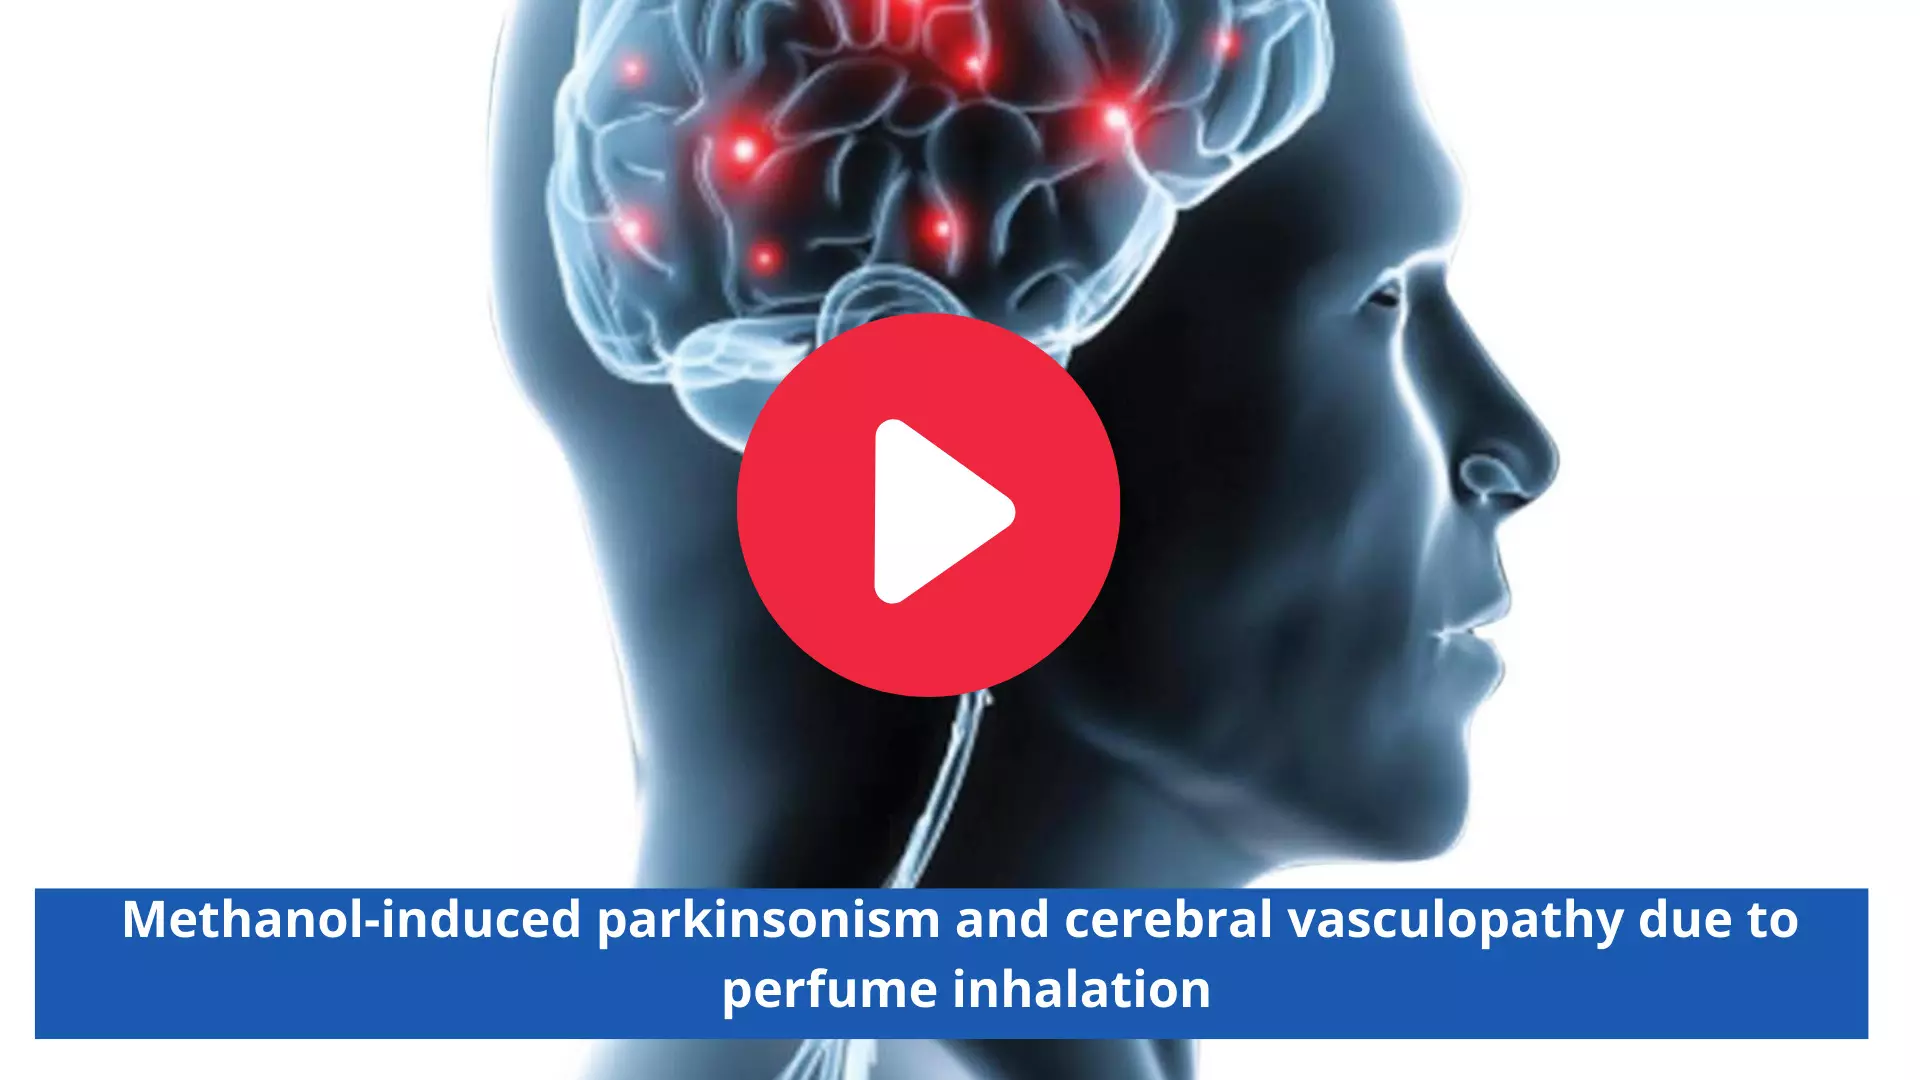 Methanol-induced parkinsonism and cerebral vasculopathy due to perfume inhalation